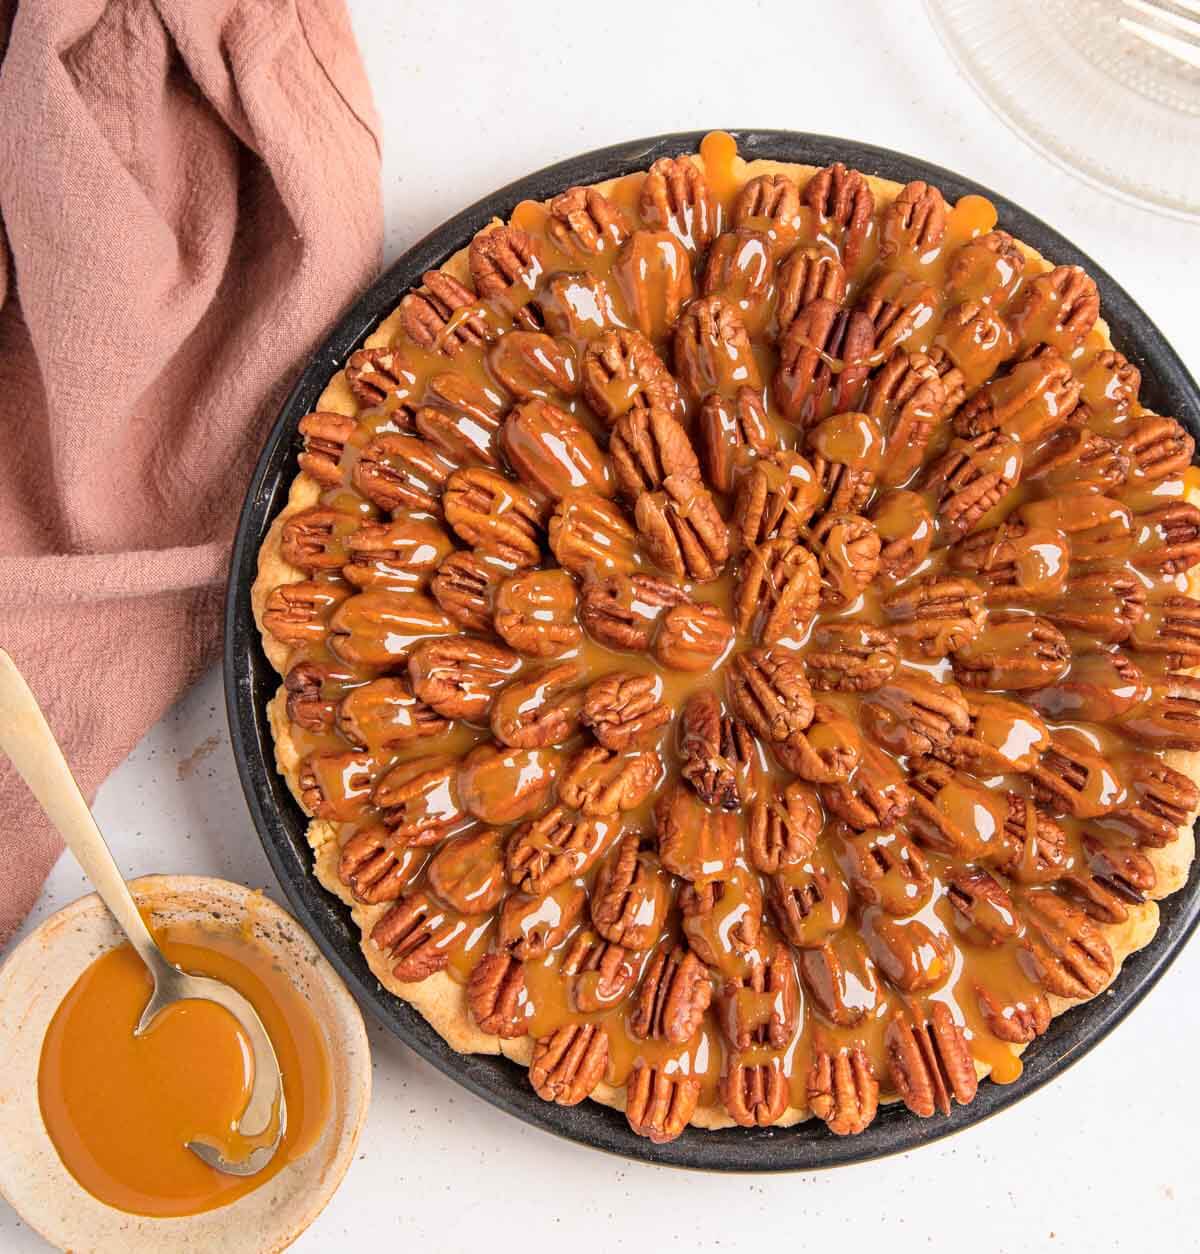 Chocolate pecan pie with a caramel sauce topping.